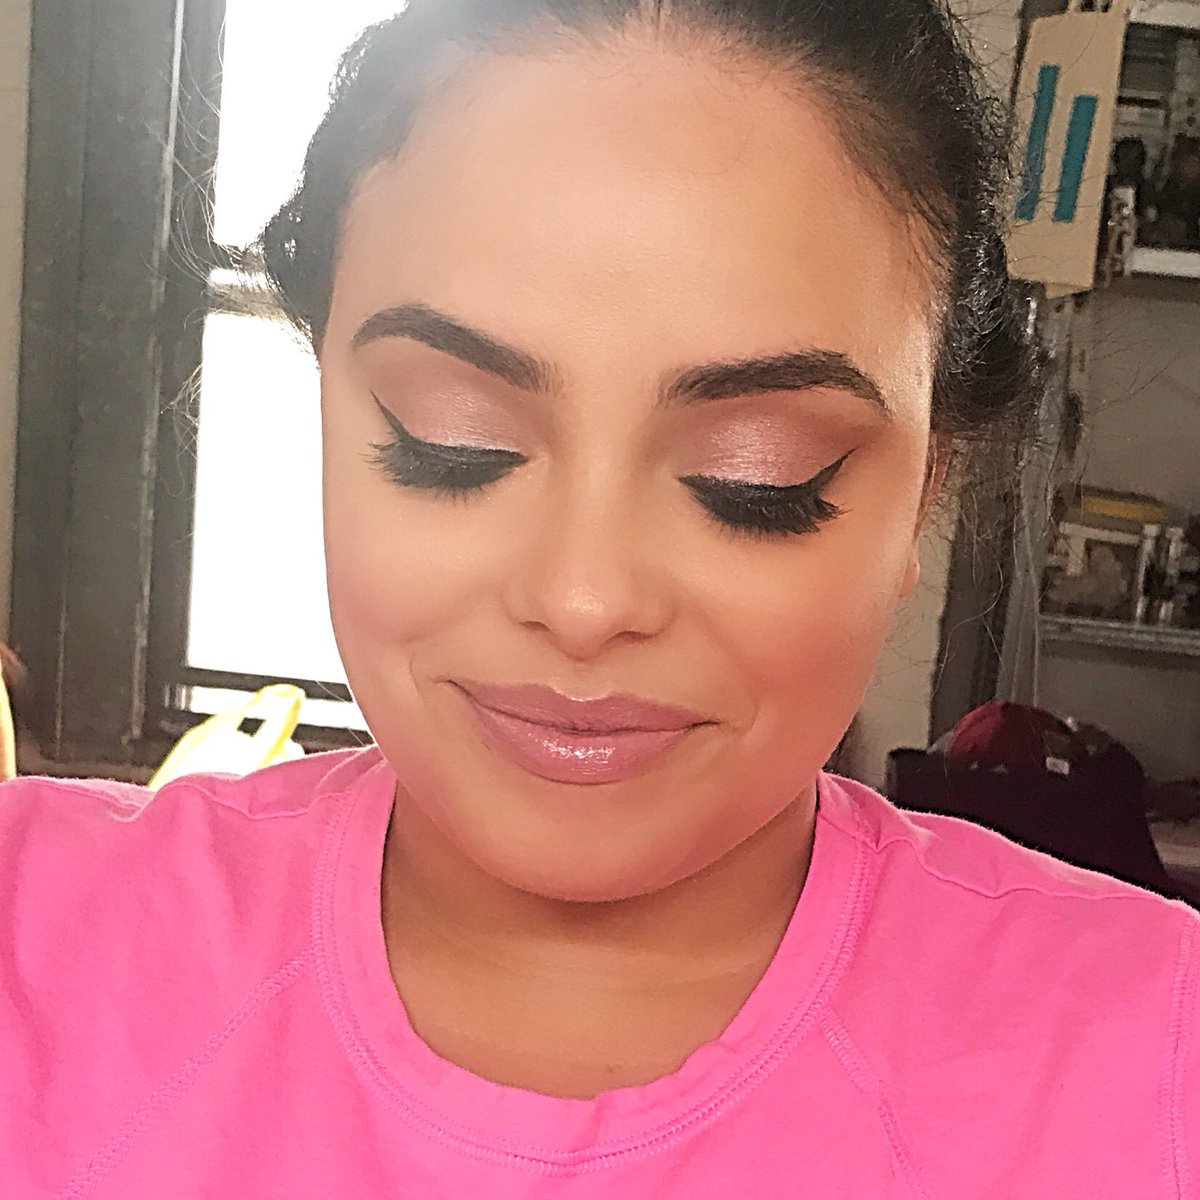 @bhcosmetics Look At The 80s palette used on this beauty! @MEHRONmakeupNYC Celebre HD Pro Foundation in Medium 3 and @NyxCosmetics Lip Gloss in Eclair!! #photoshoot #paulasorianobeauty #psb #psbeauty #njmakeupartist #nycmakeupartist #jerseycitymua #jerseycity #nyc